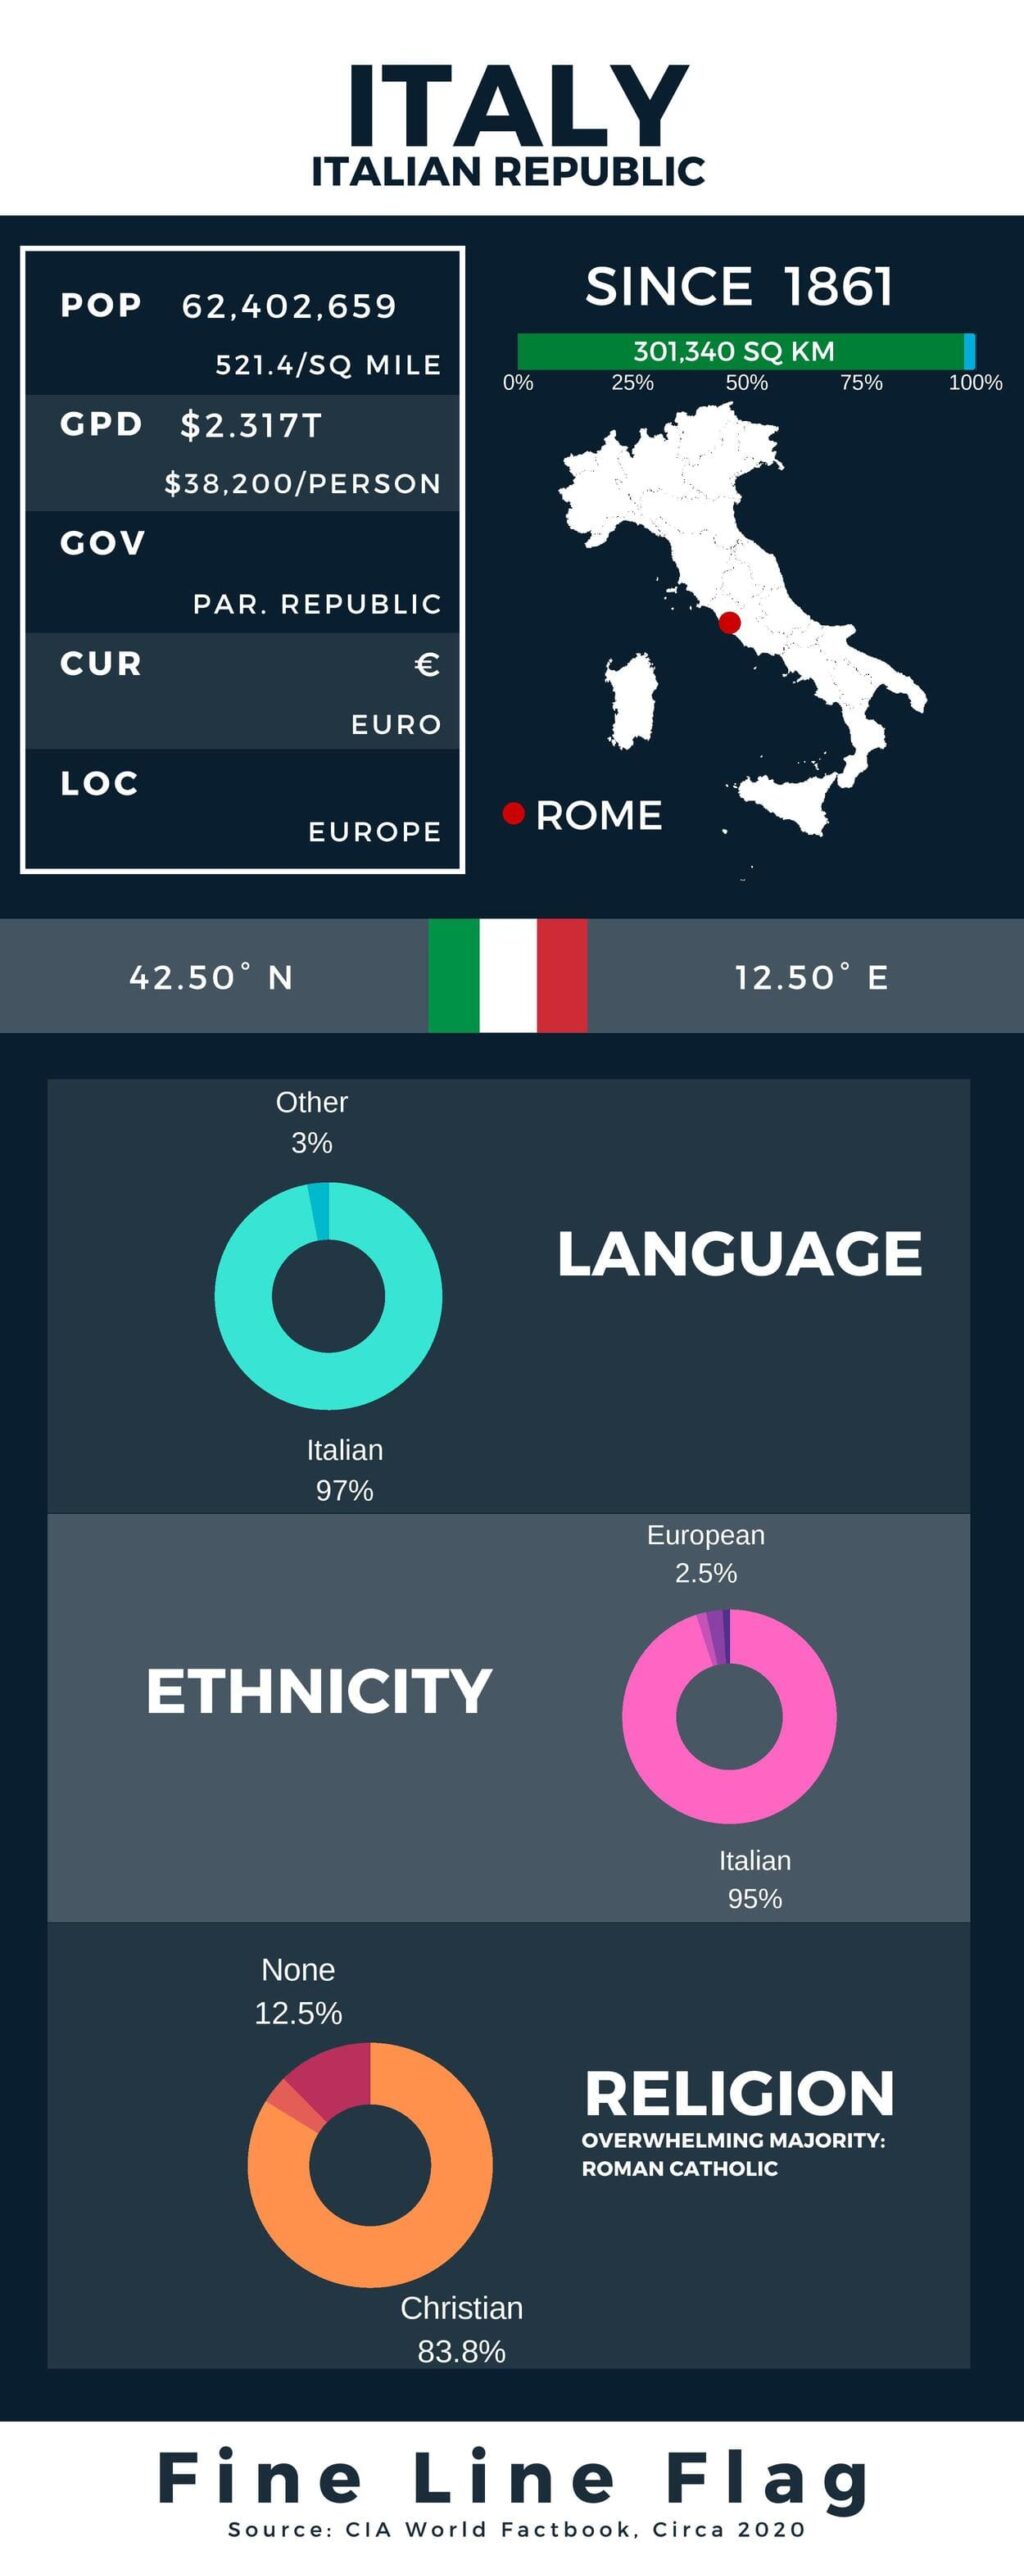 Italy Profile Facts Summary Infographic